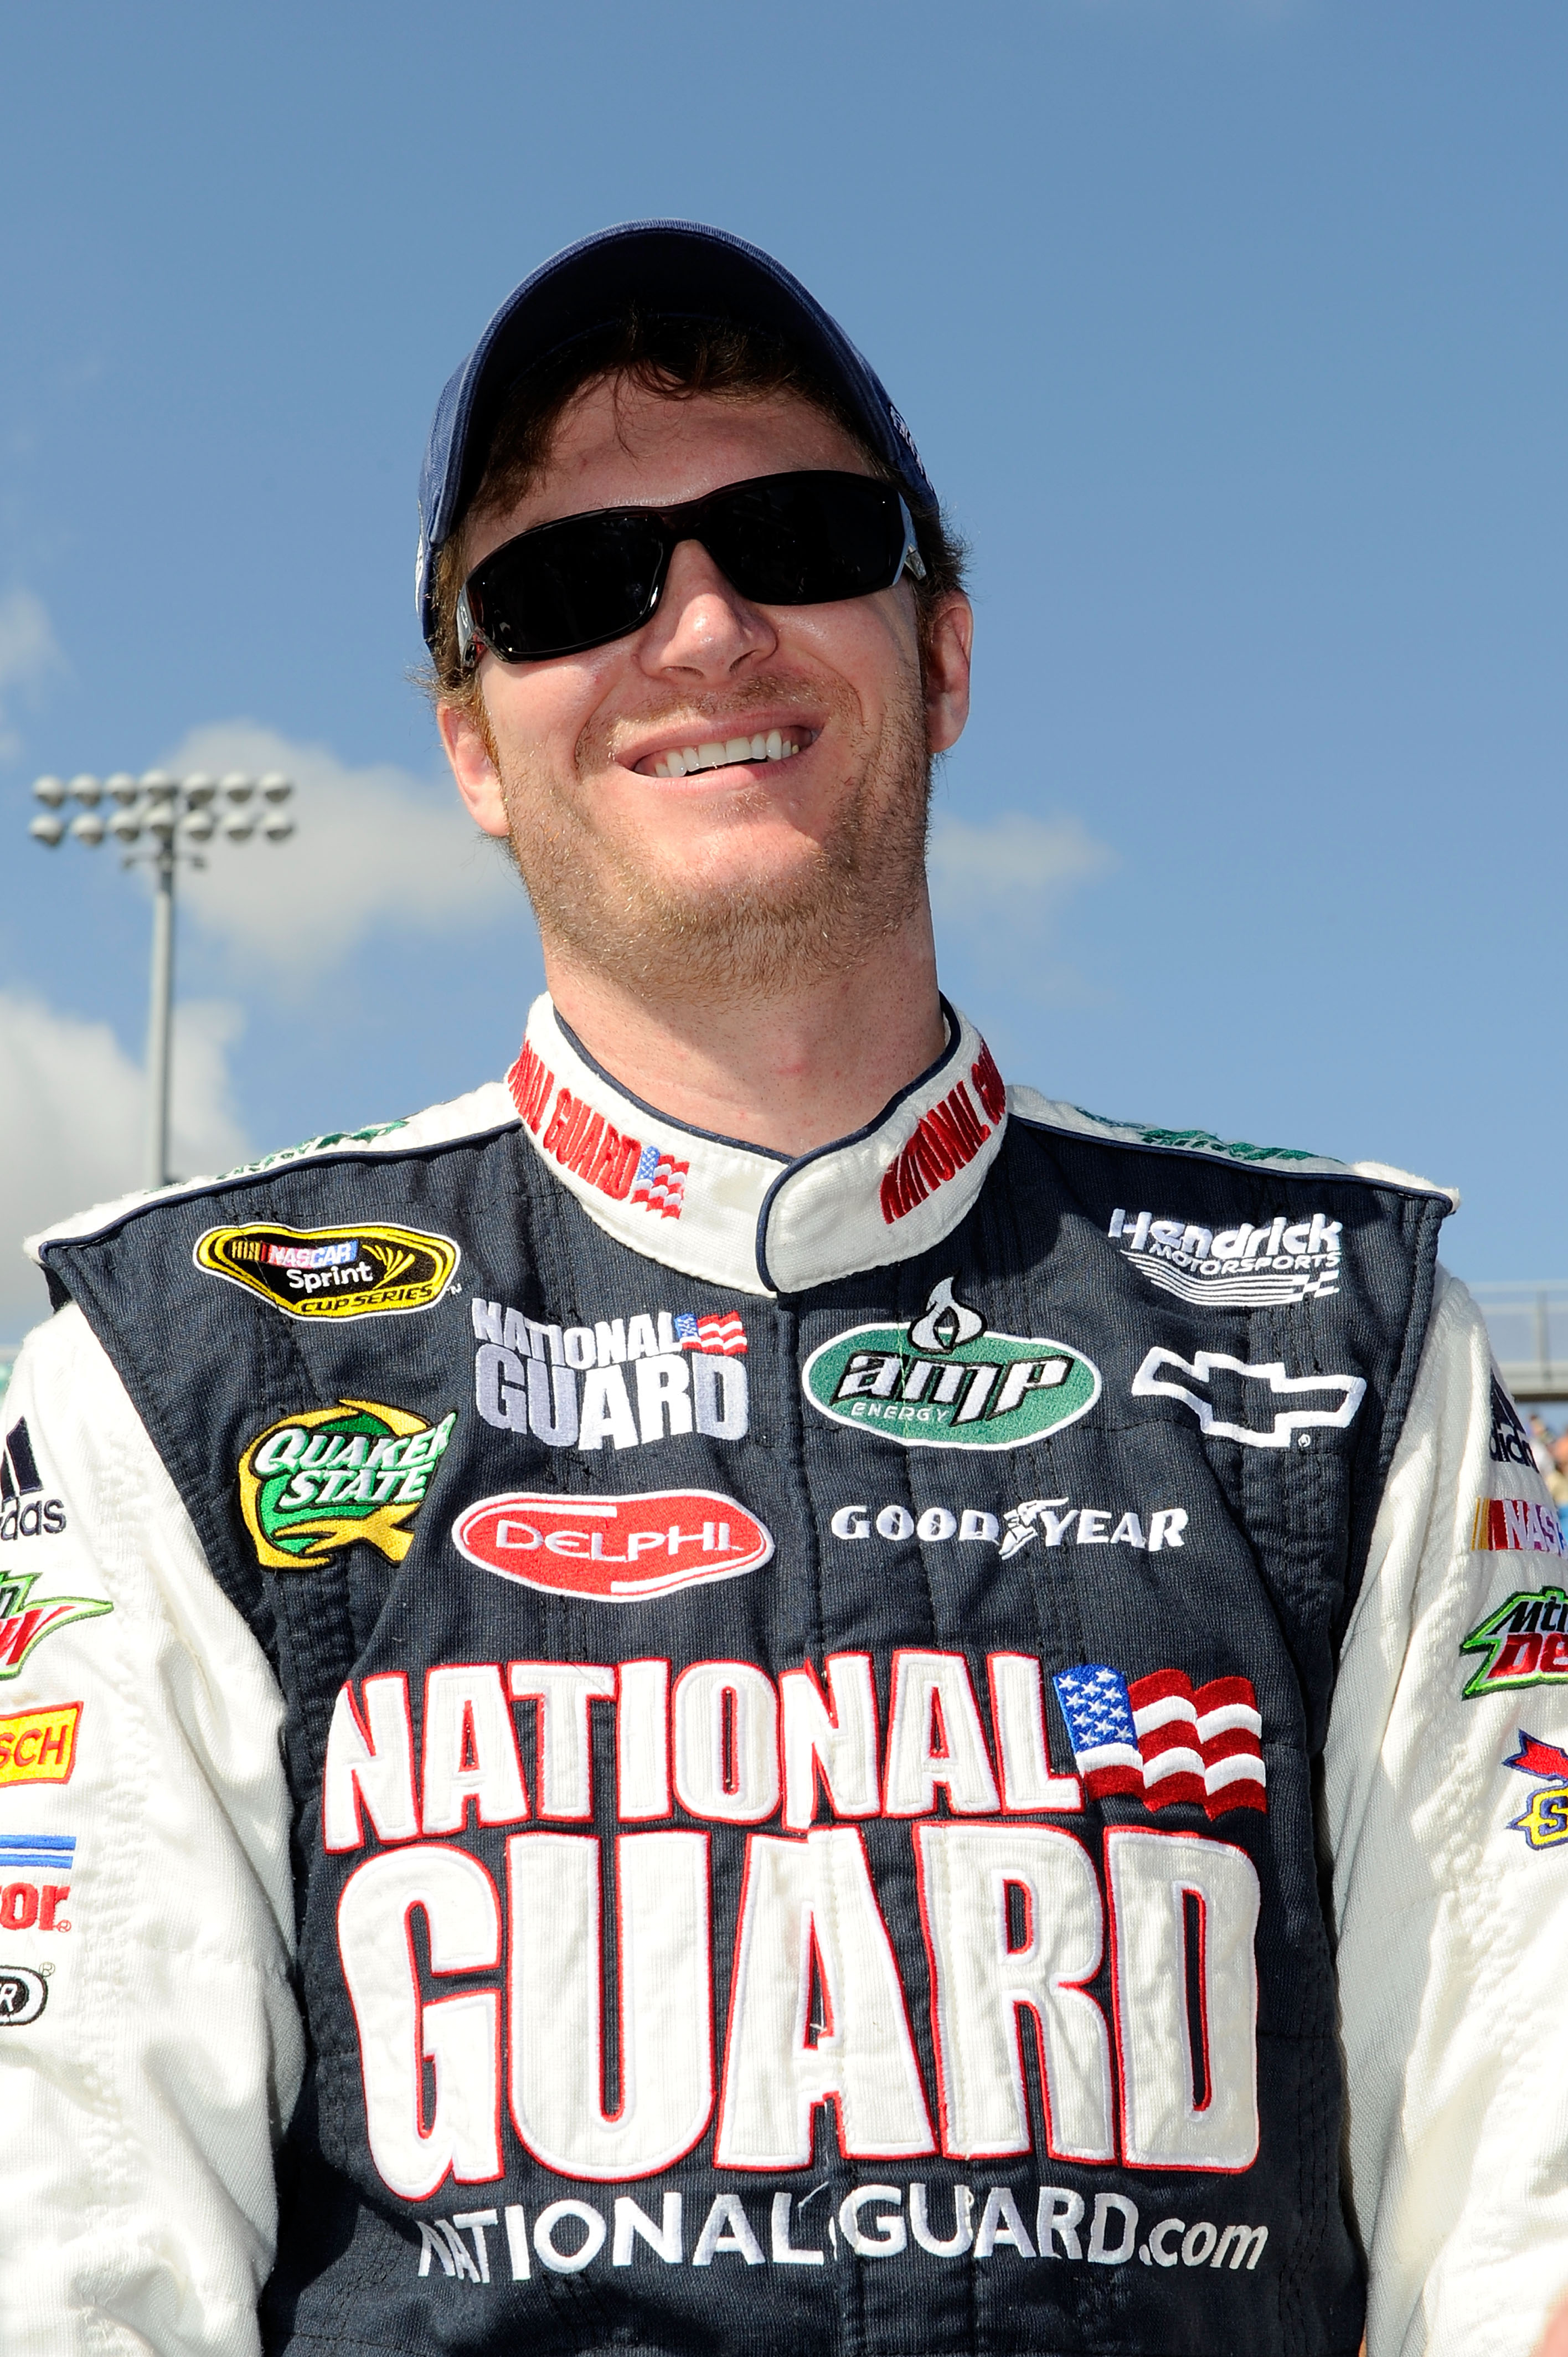 HOMESTEAD, FL - NOVEMBER 21:  Dale Earnhardt Jr., driver of the #88 National Guard/AMP Energy Chevrolet, stands on pit road prior to the NASCAR Sprint Cup Series Ford 400 at Homestead-Miami Speedway on November 21, 2010 in Homestead, Florida.  (Photo by J